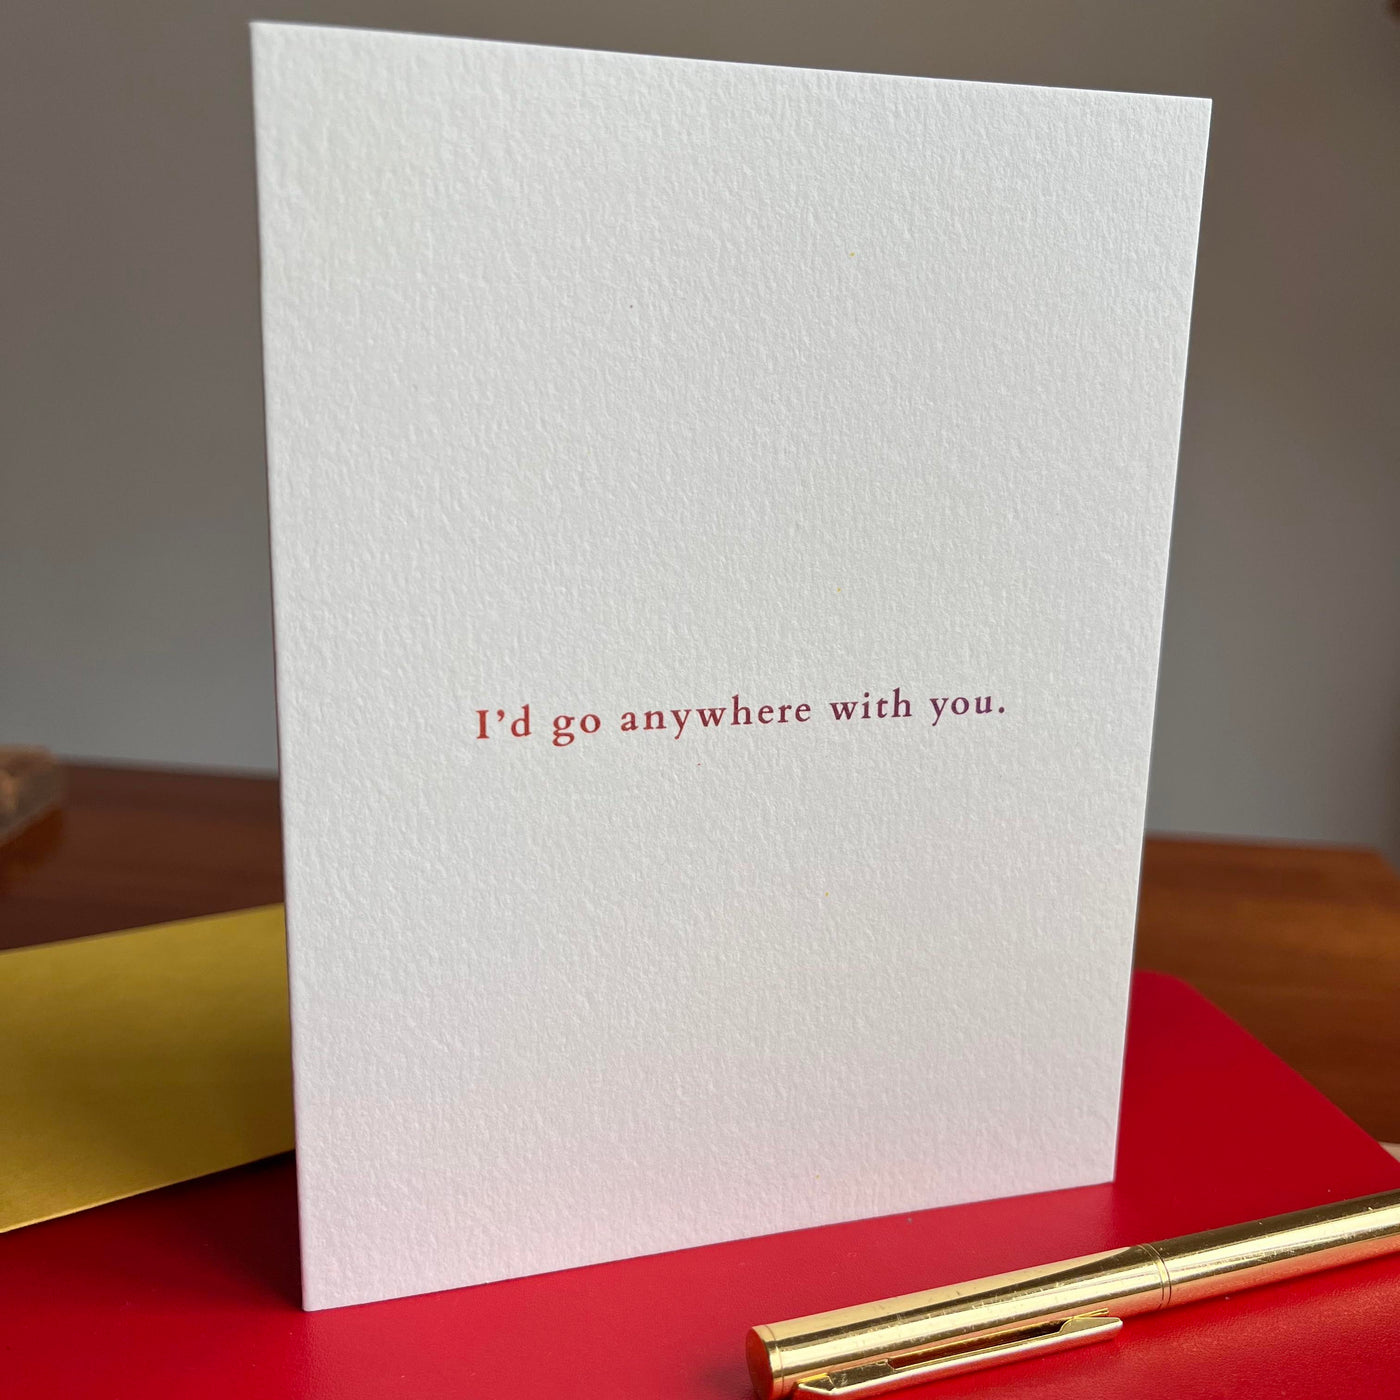 Beknown greeting card on red notebook w/ gold pen. I'd go anywhere with you.